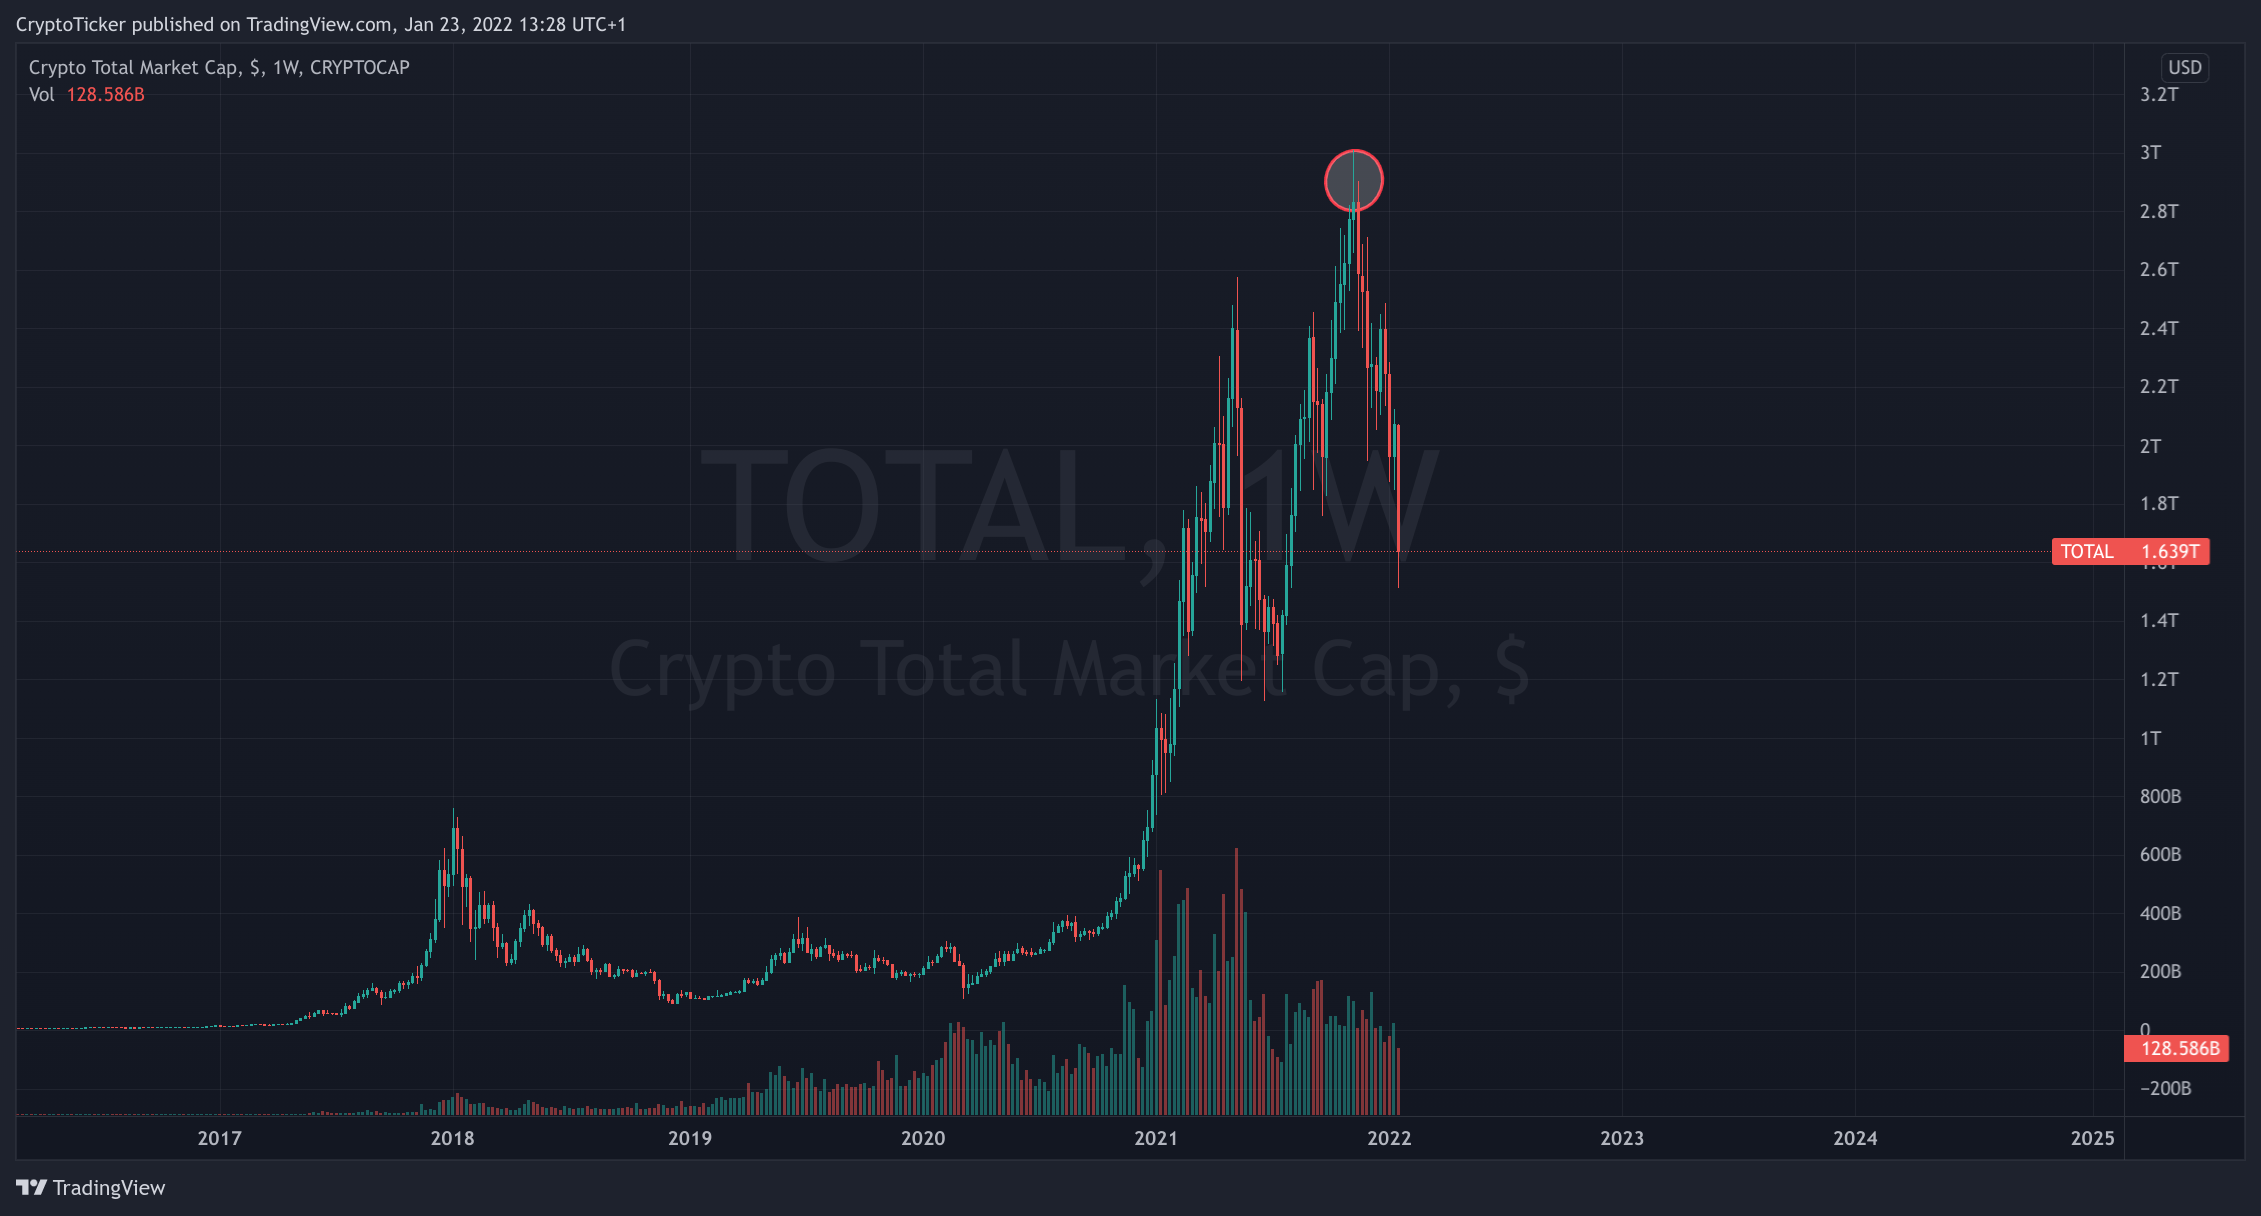 Total Crypto Cap 1-week chart showing the recent Crypto bear market